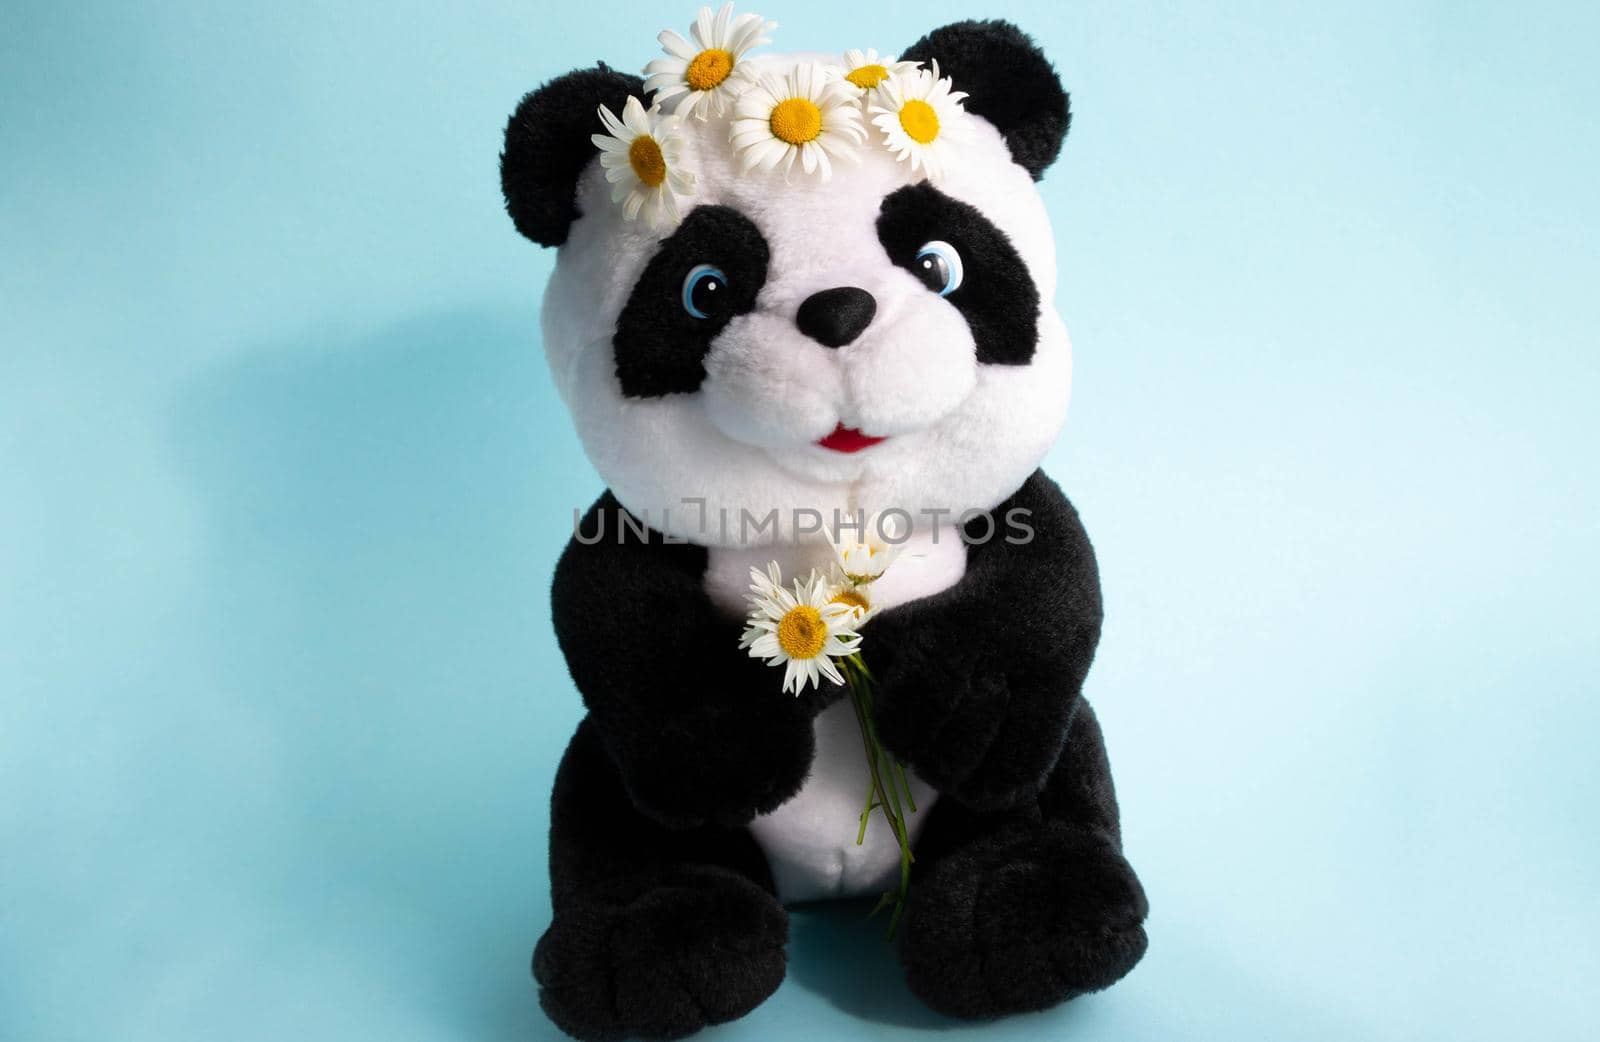 Soft toy Panda on a blue background with daisies on his head.Concept of the environment by lapushka62